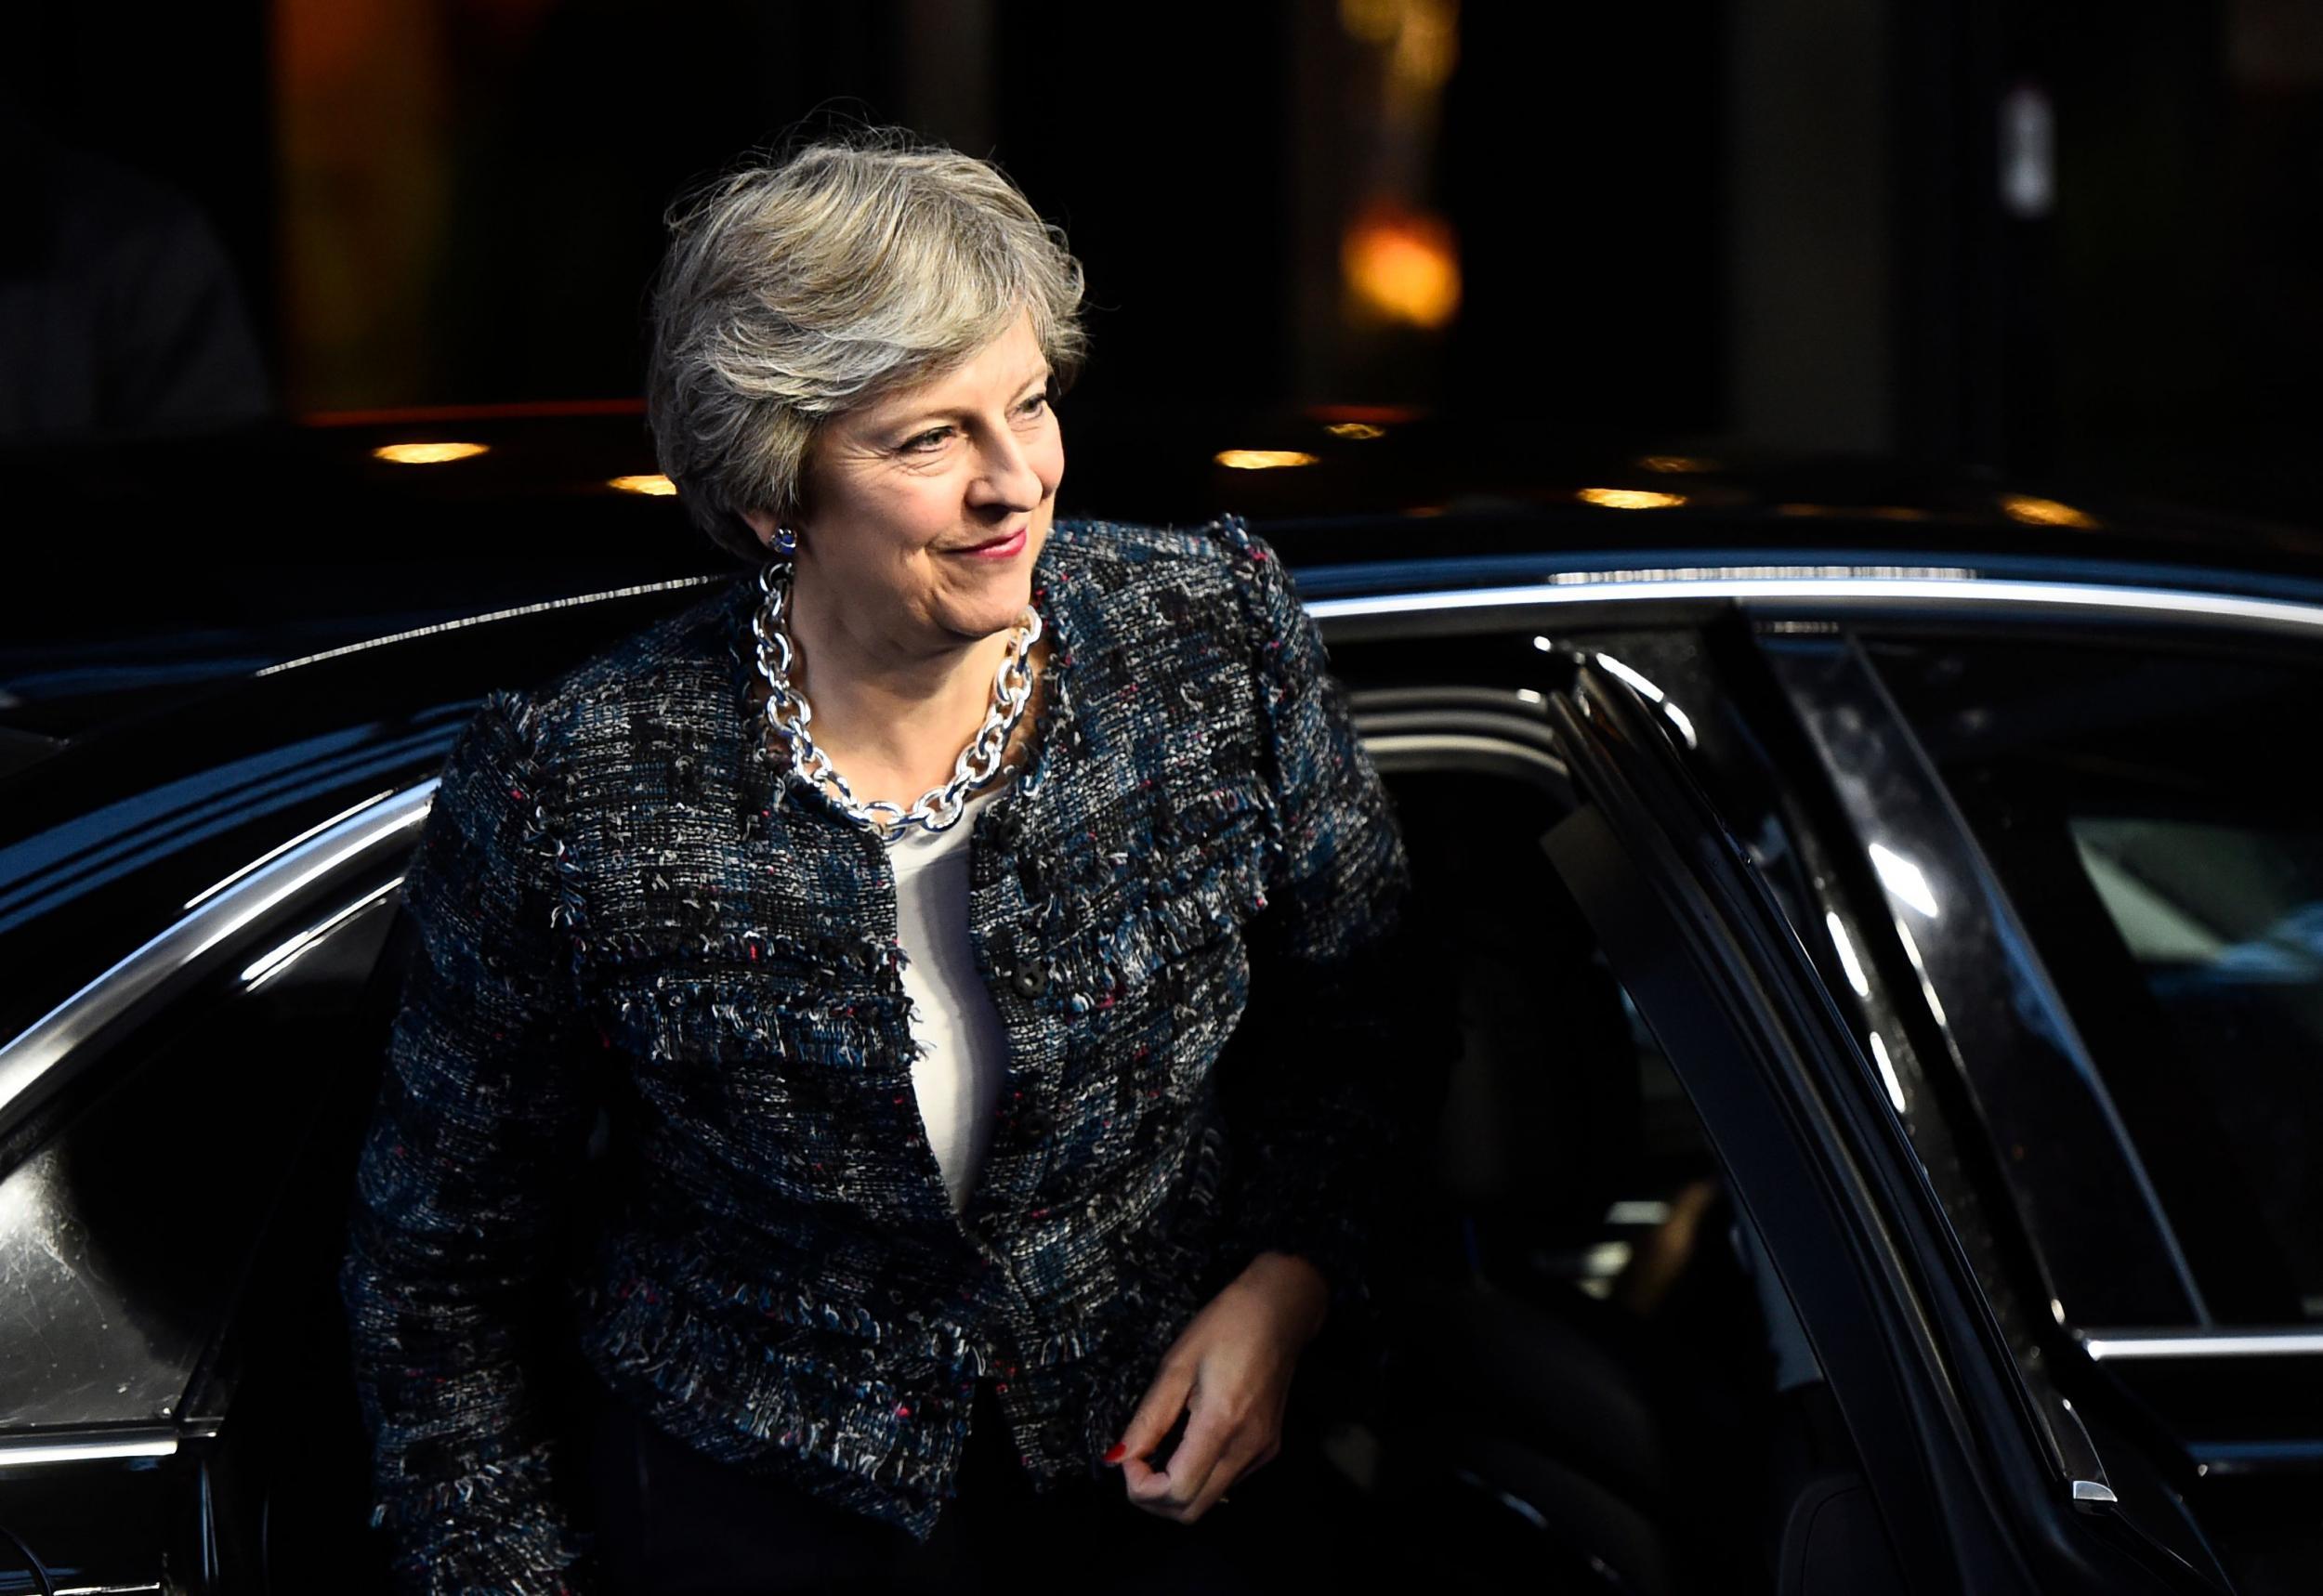 Theresa May arrives to attend the European Social Summit in Gothenburg, Sweden, on November 17, 2017